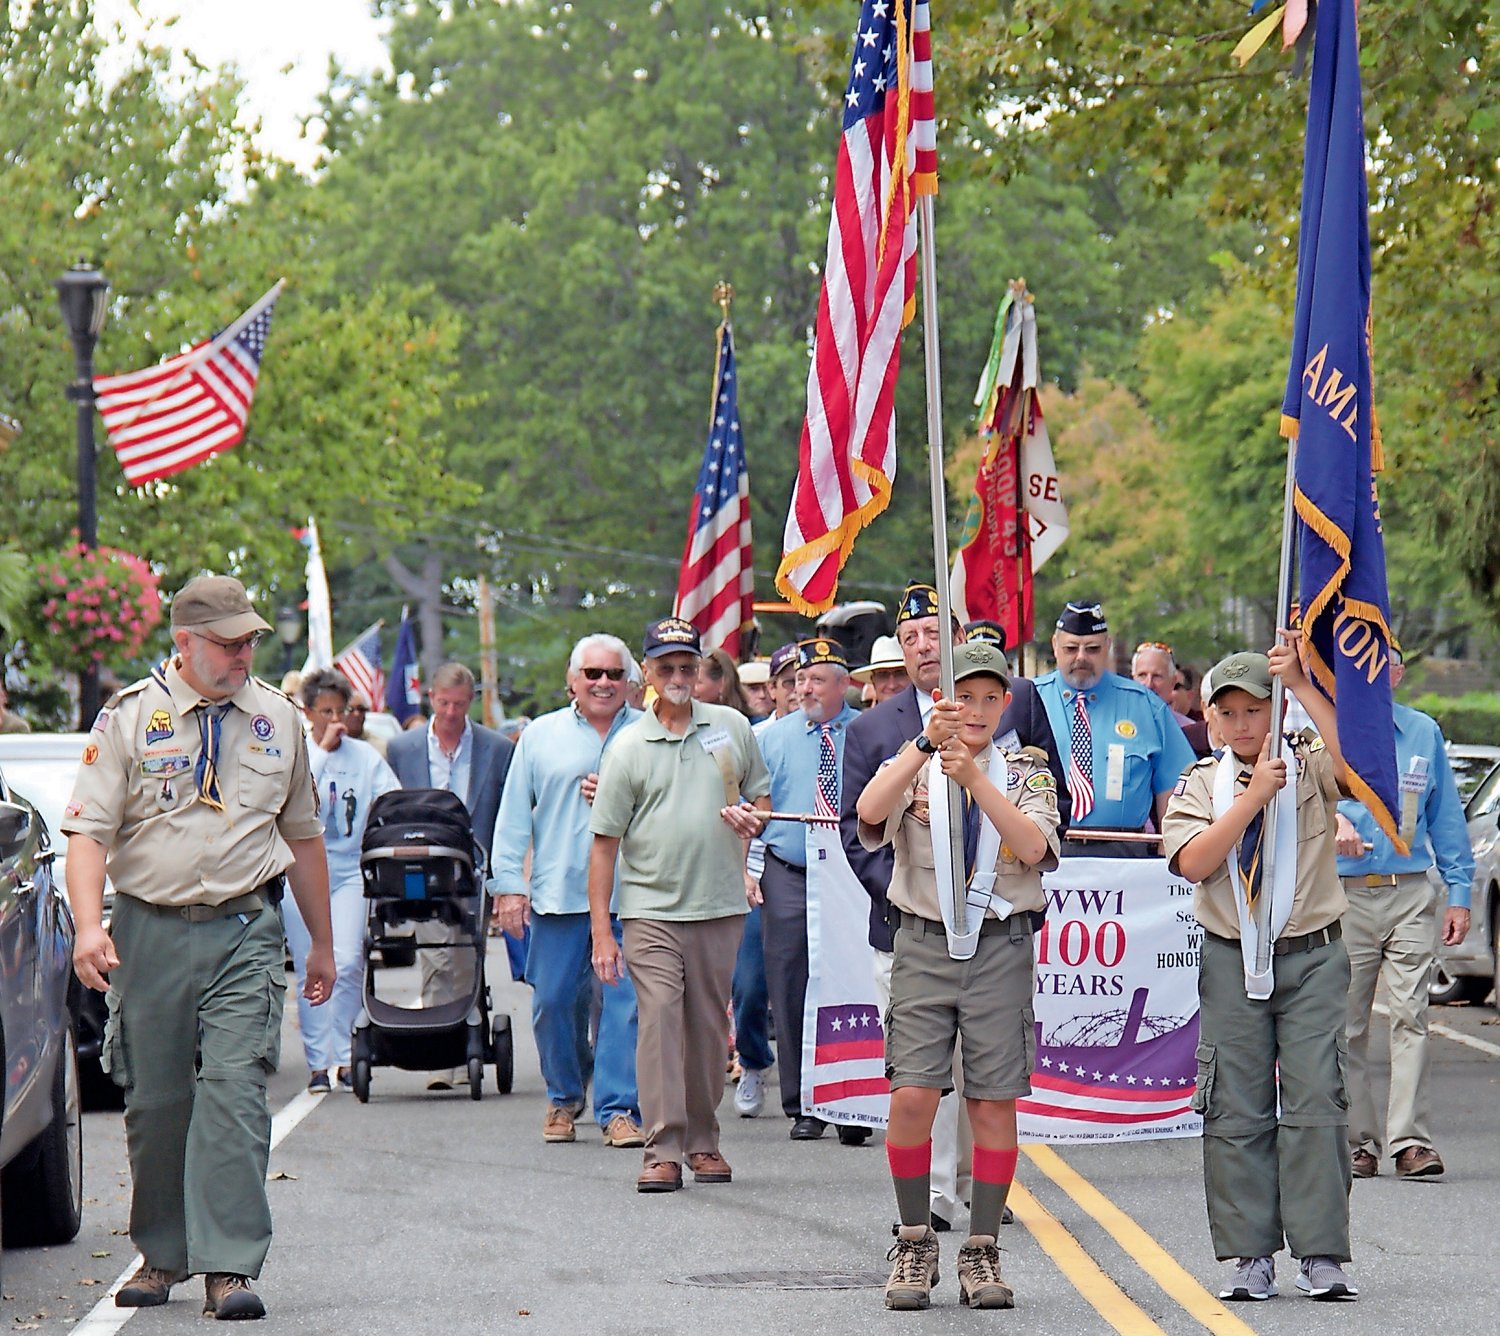 Boy Scout Troop 43 members Jared White, 12, front left, and Paolo Romito, 11, front right, led the parade.